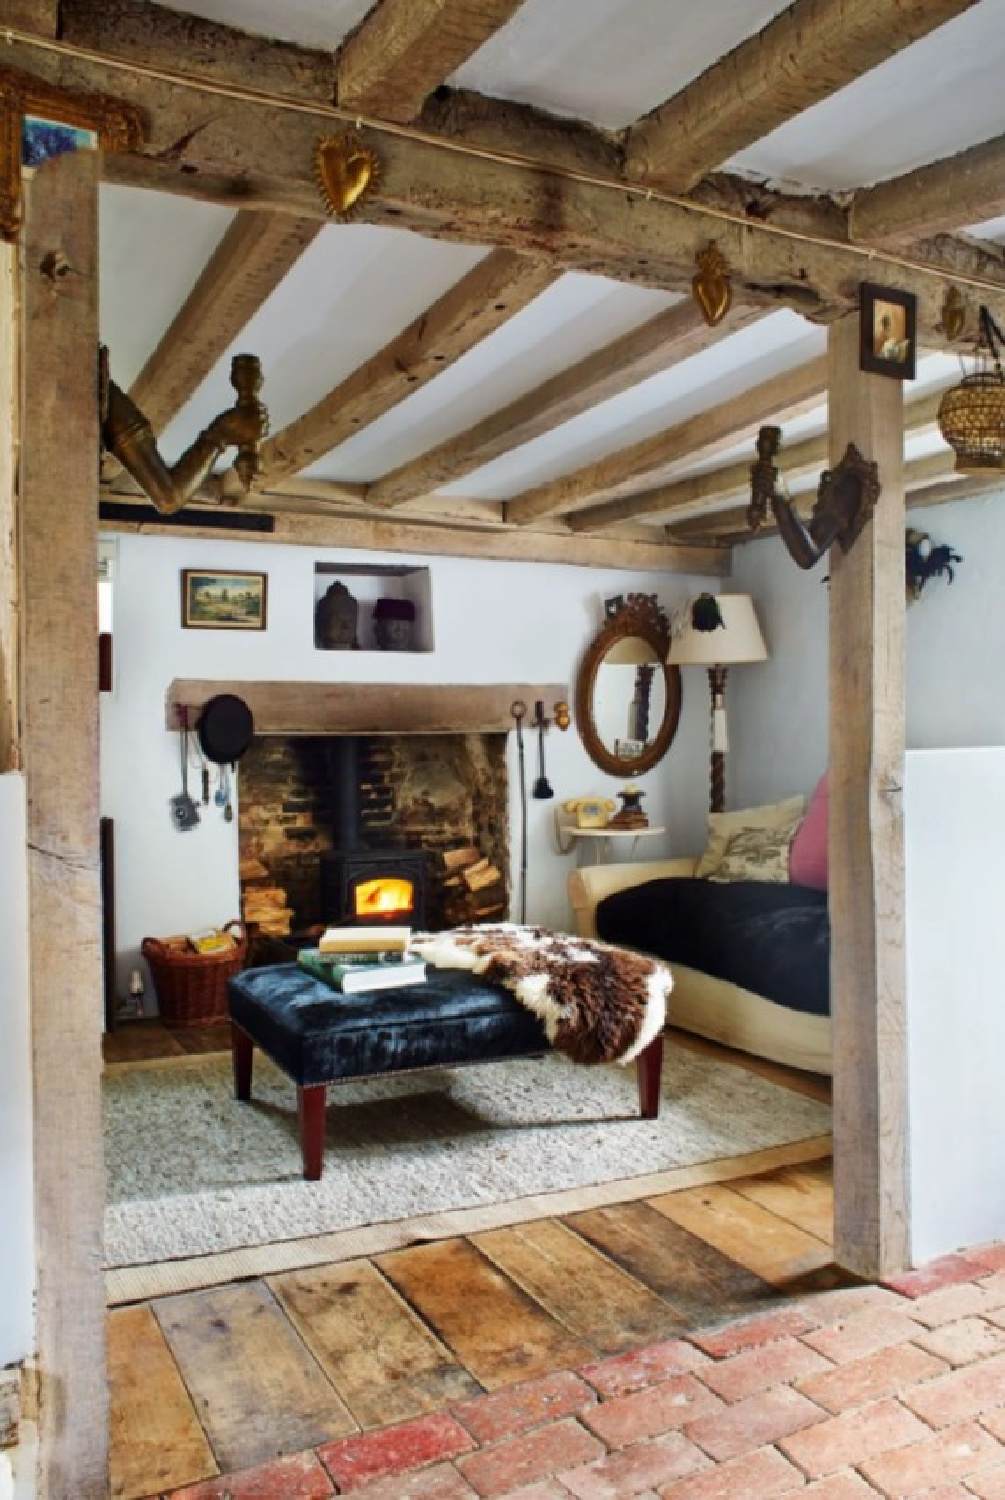 Rustic Sussex farmhouse with snug room by Harriet Anstruther (photo: Ngoc Minh Mgo fin House & Garden UK). #snugroom #rusticfarmhouse